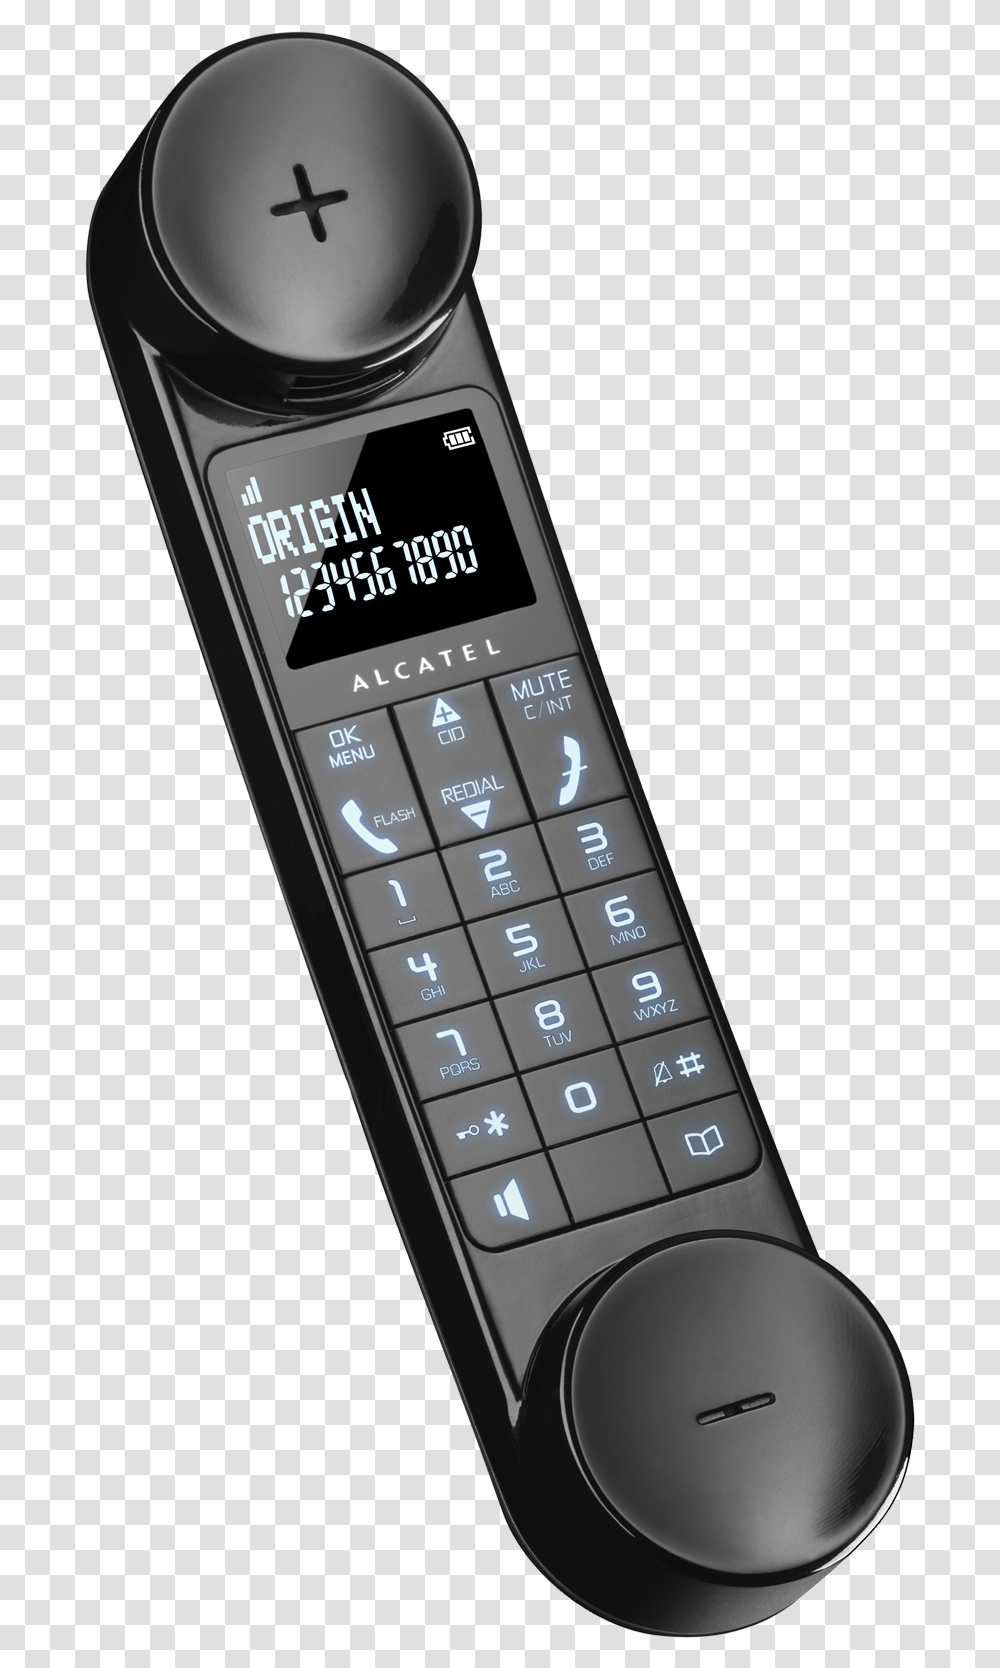 How To Find Missed Calls Portable, Mobile Phone, Electronics, Cell Phone, Computer Keyboard Transparent Png